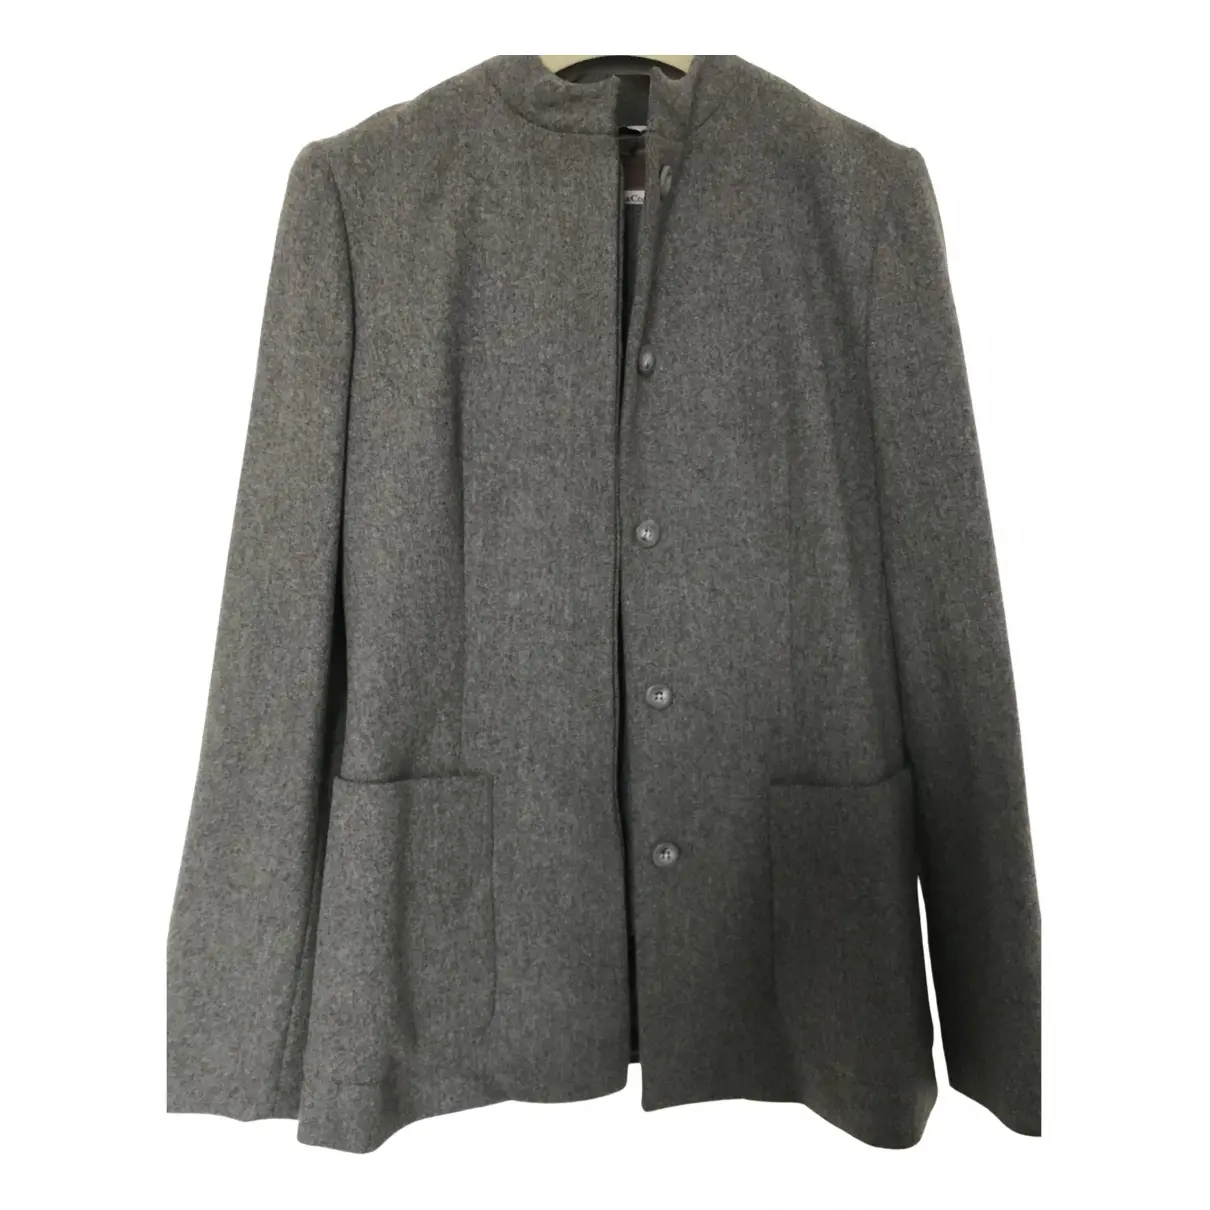 Wool suit jacket Max & Co